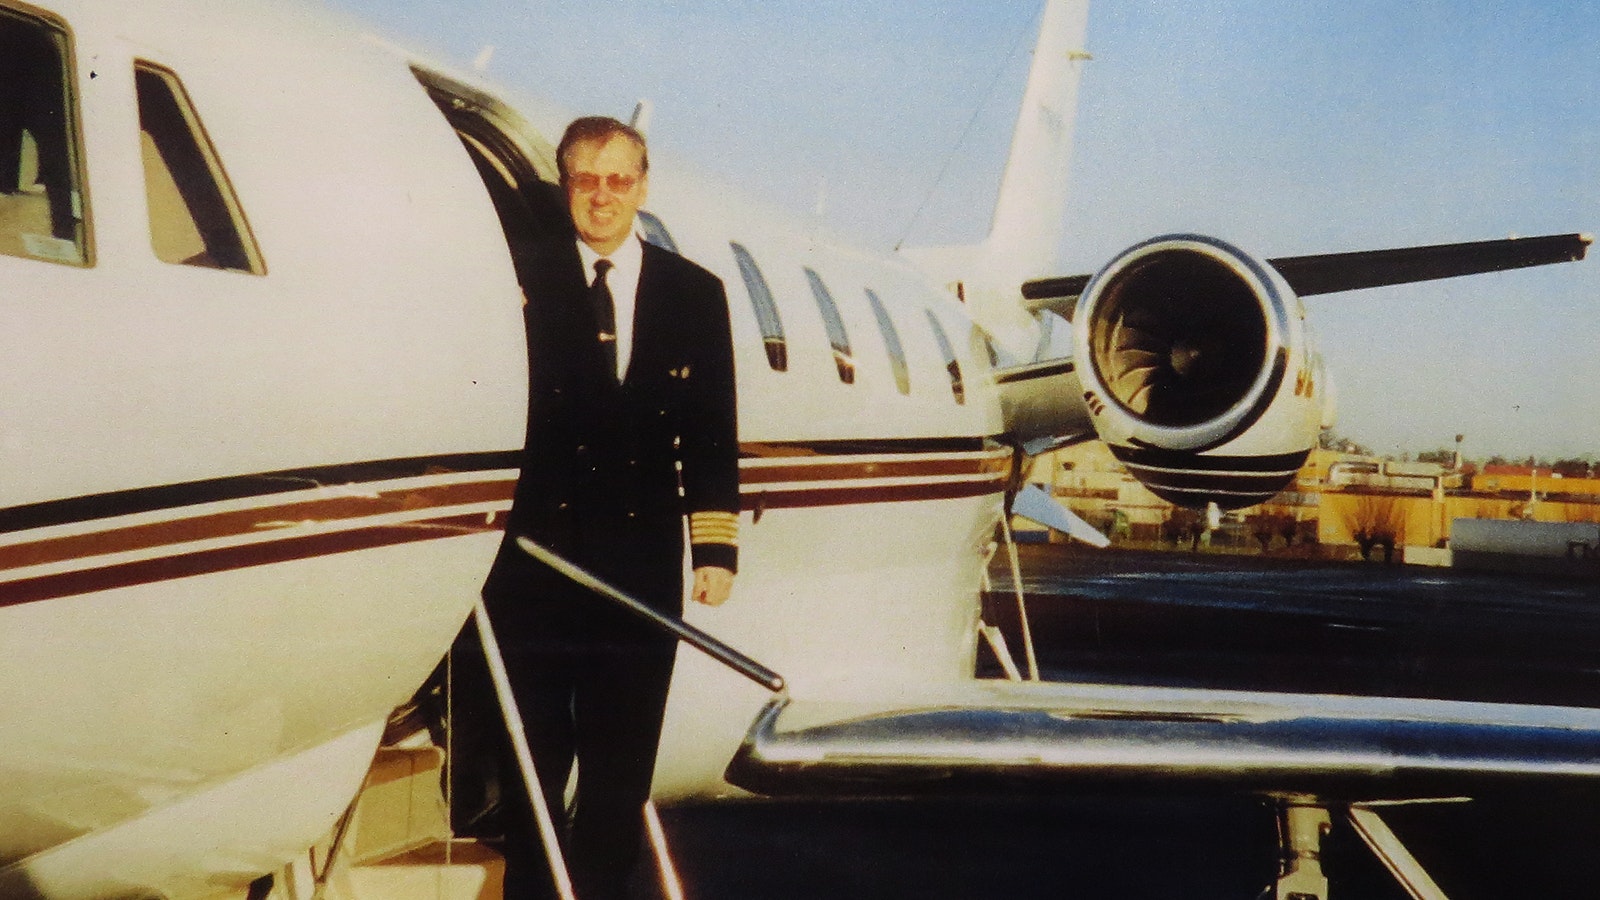 For more than 20 years, Dallas Chopping served as a corporate pilot, first on twin-engine piston planes, then twin-engine turboprops, and then Citation business jets.